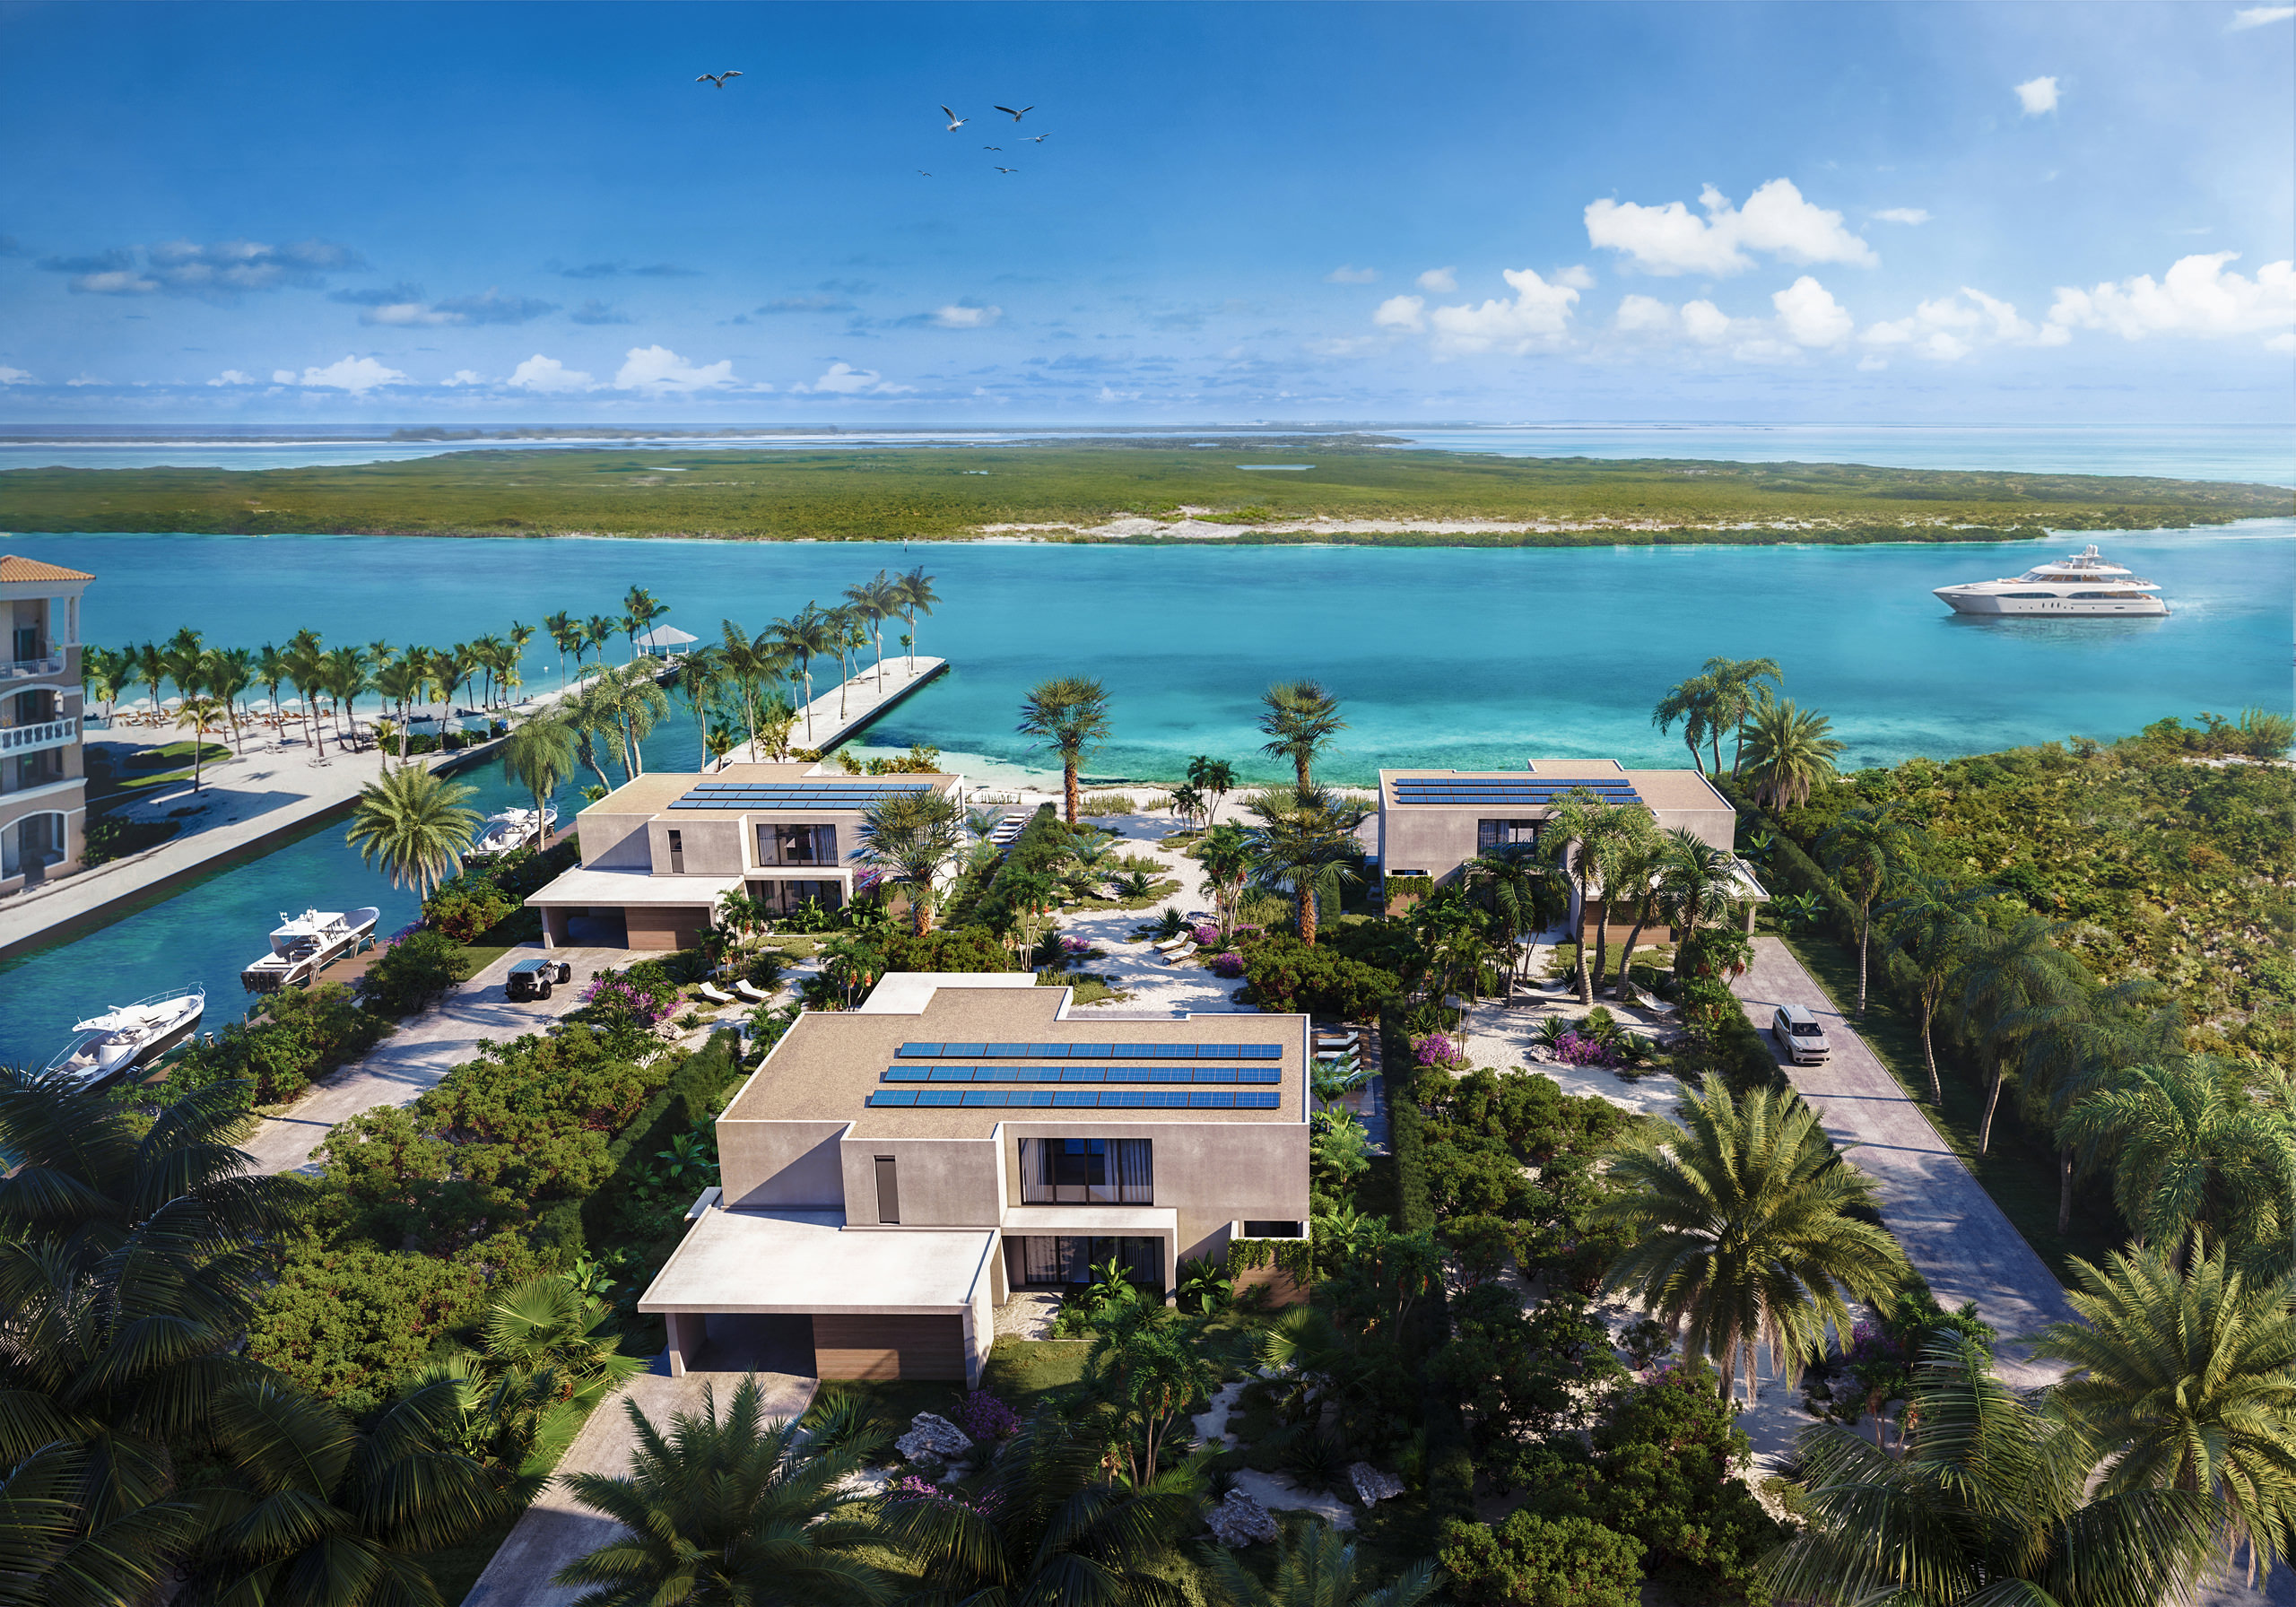 Semi-aerial 3D exterior rendering over-viewing the island villa complex located at the exotic beach front